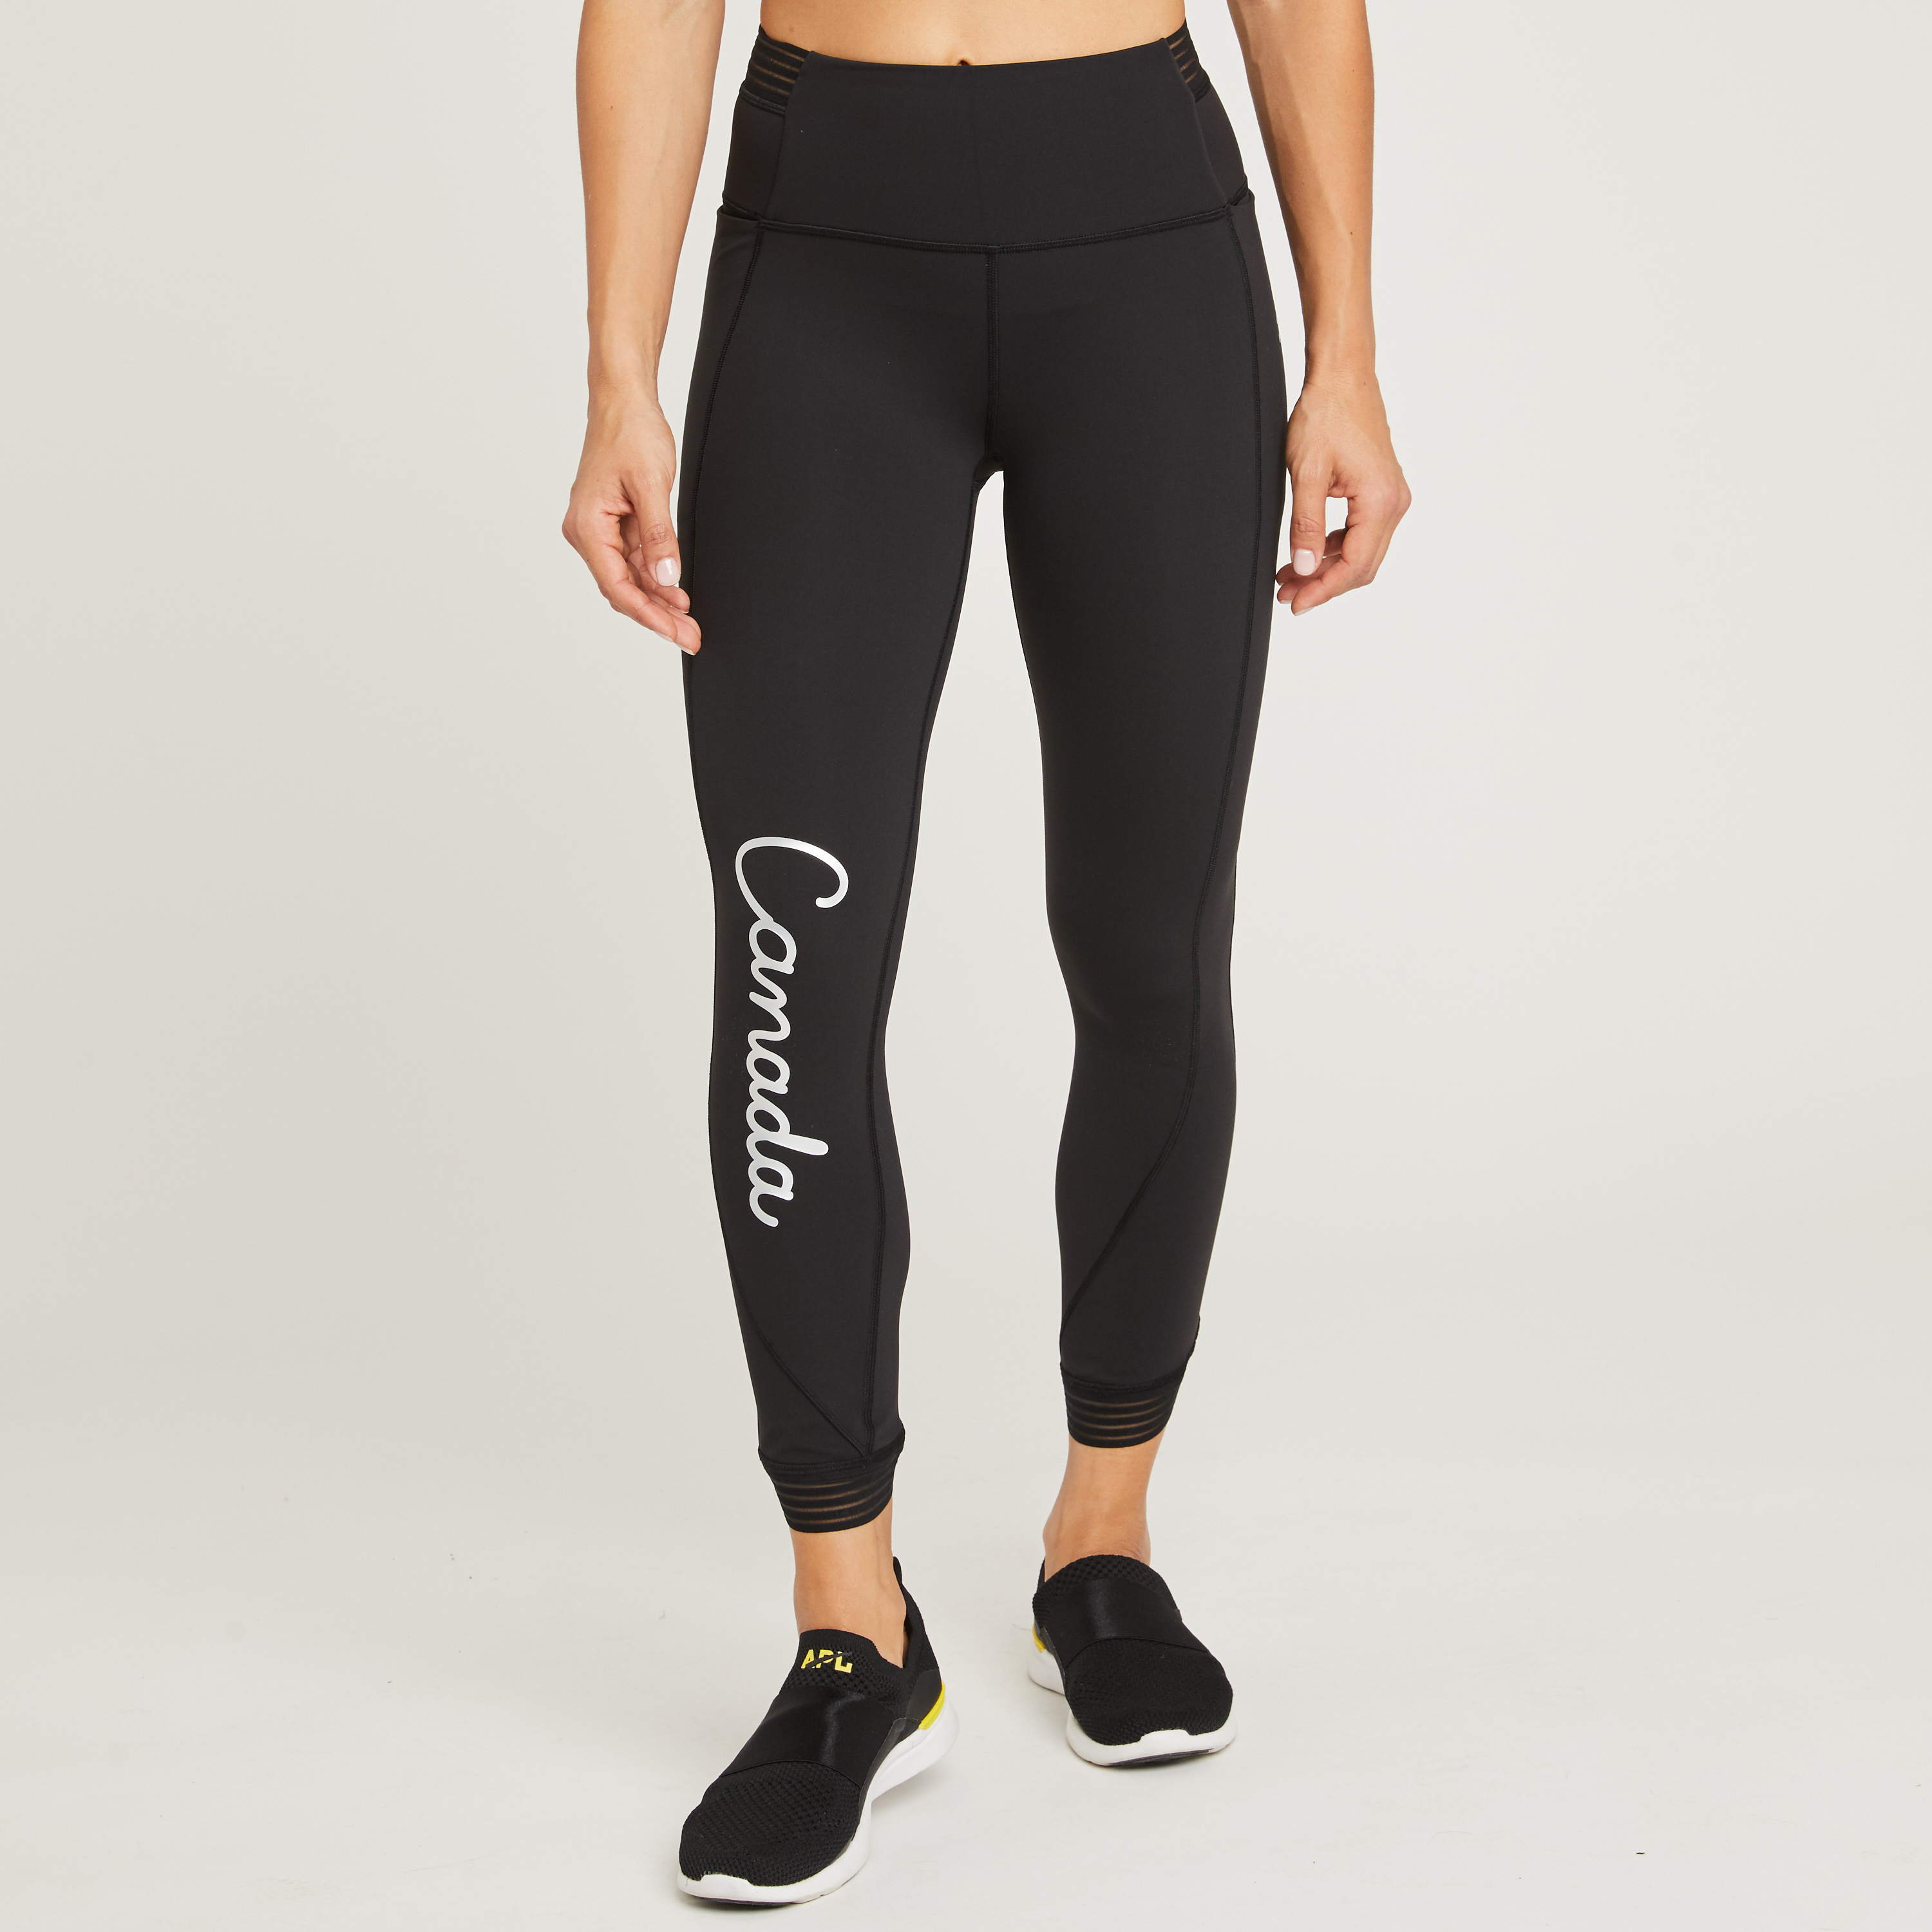 lululemon Find Focus Tight Canada - SoulCycle Shop